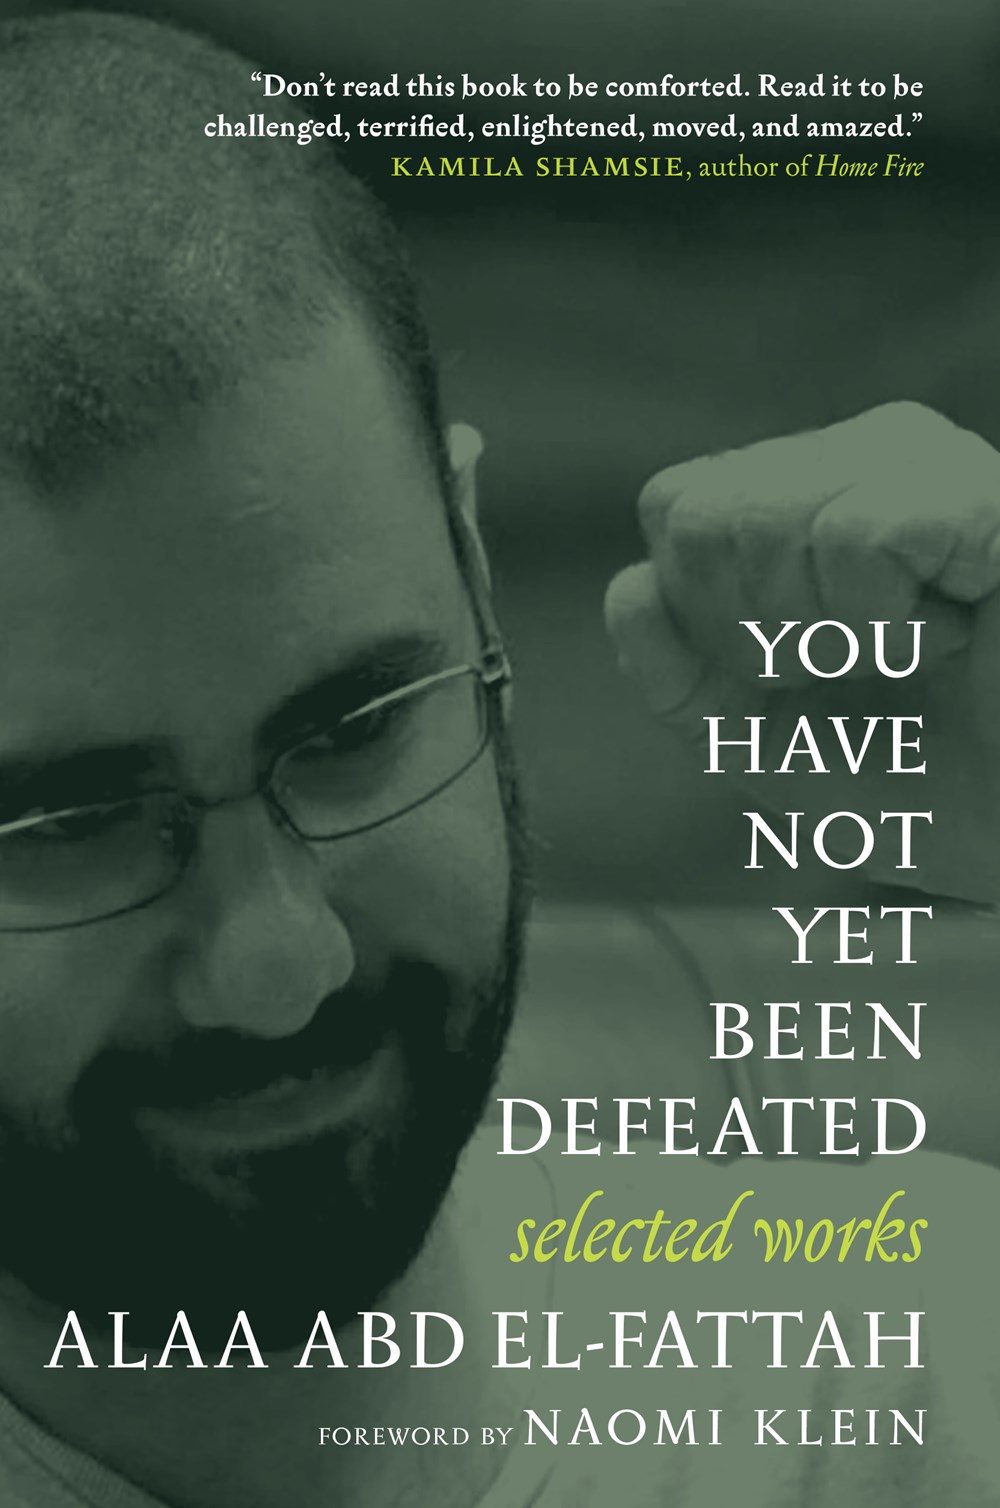 The cover for Alaa Abd el-Fattah - 'You Have Not Yet Been Defeated'